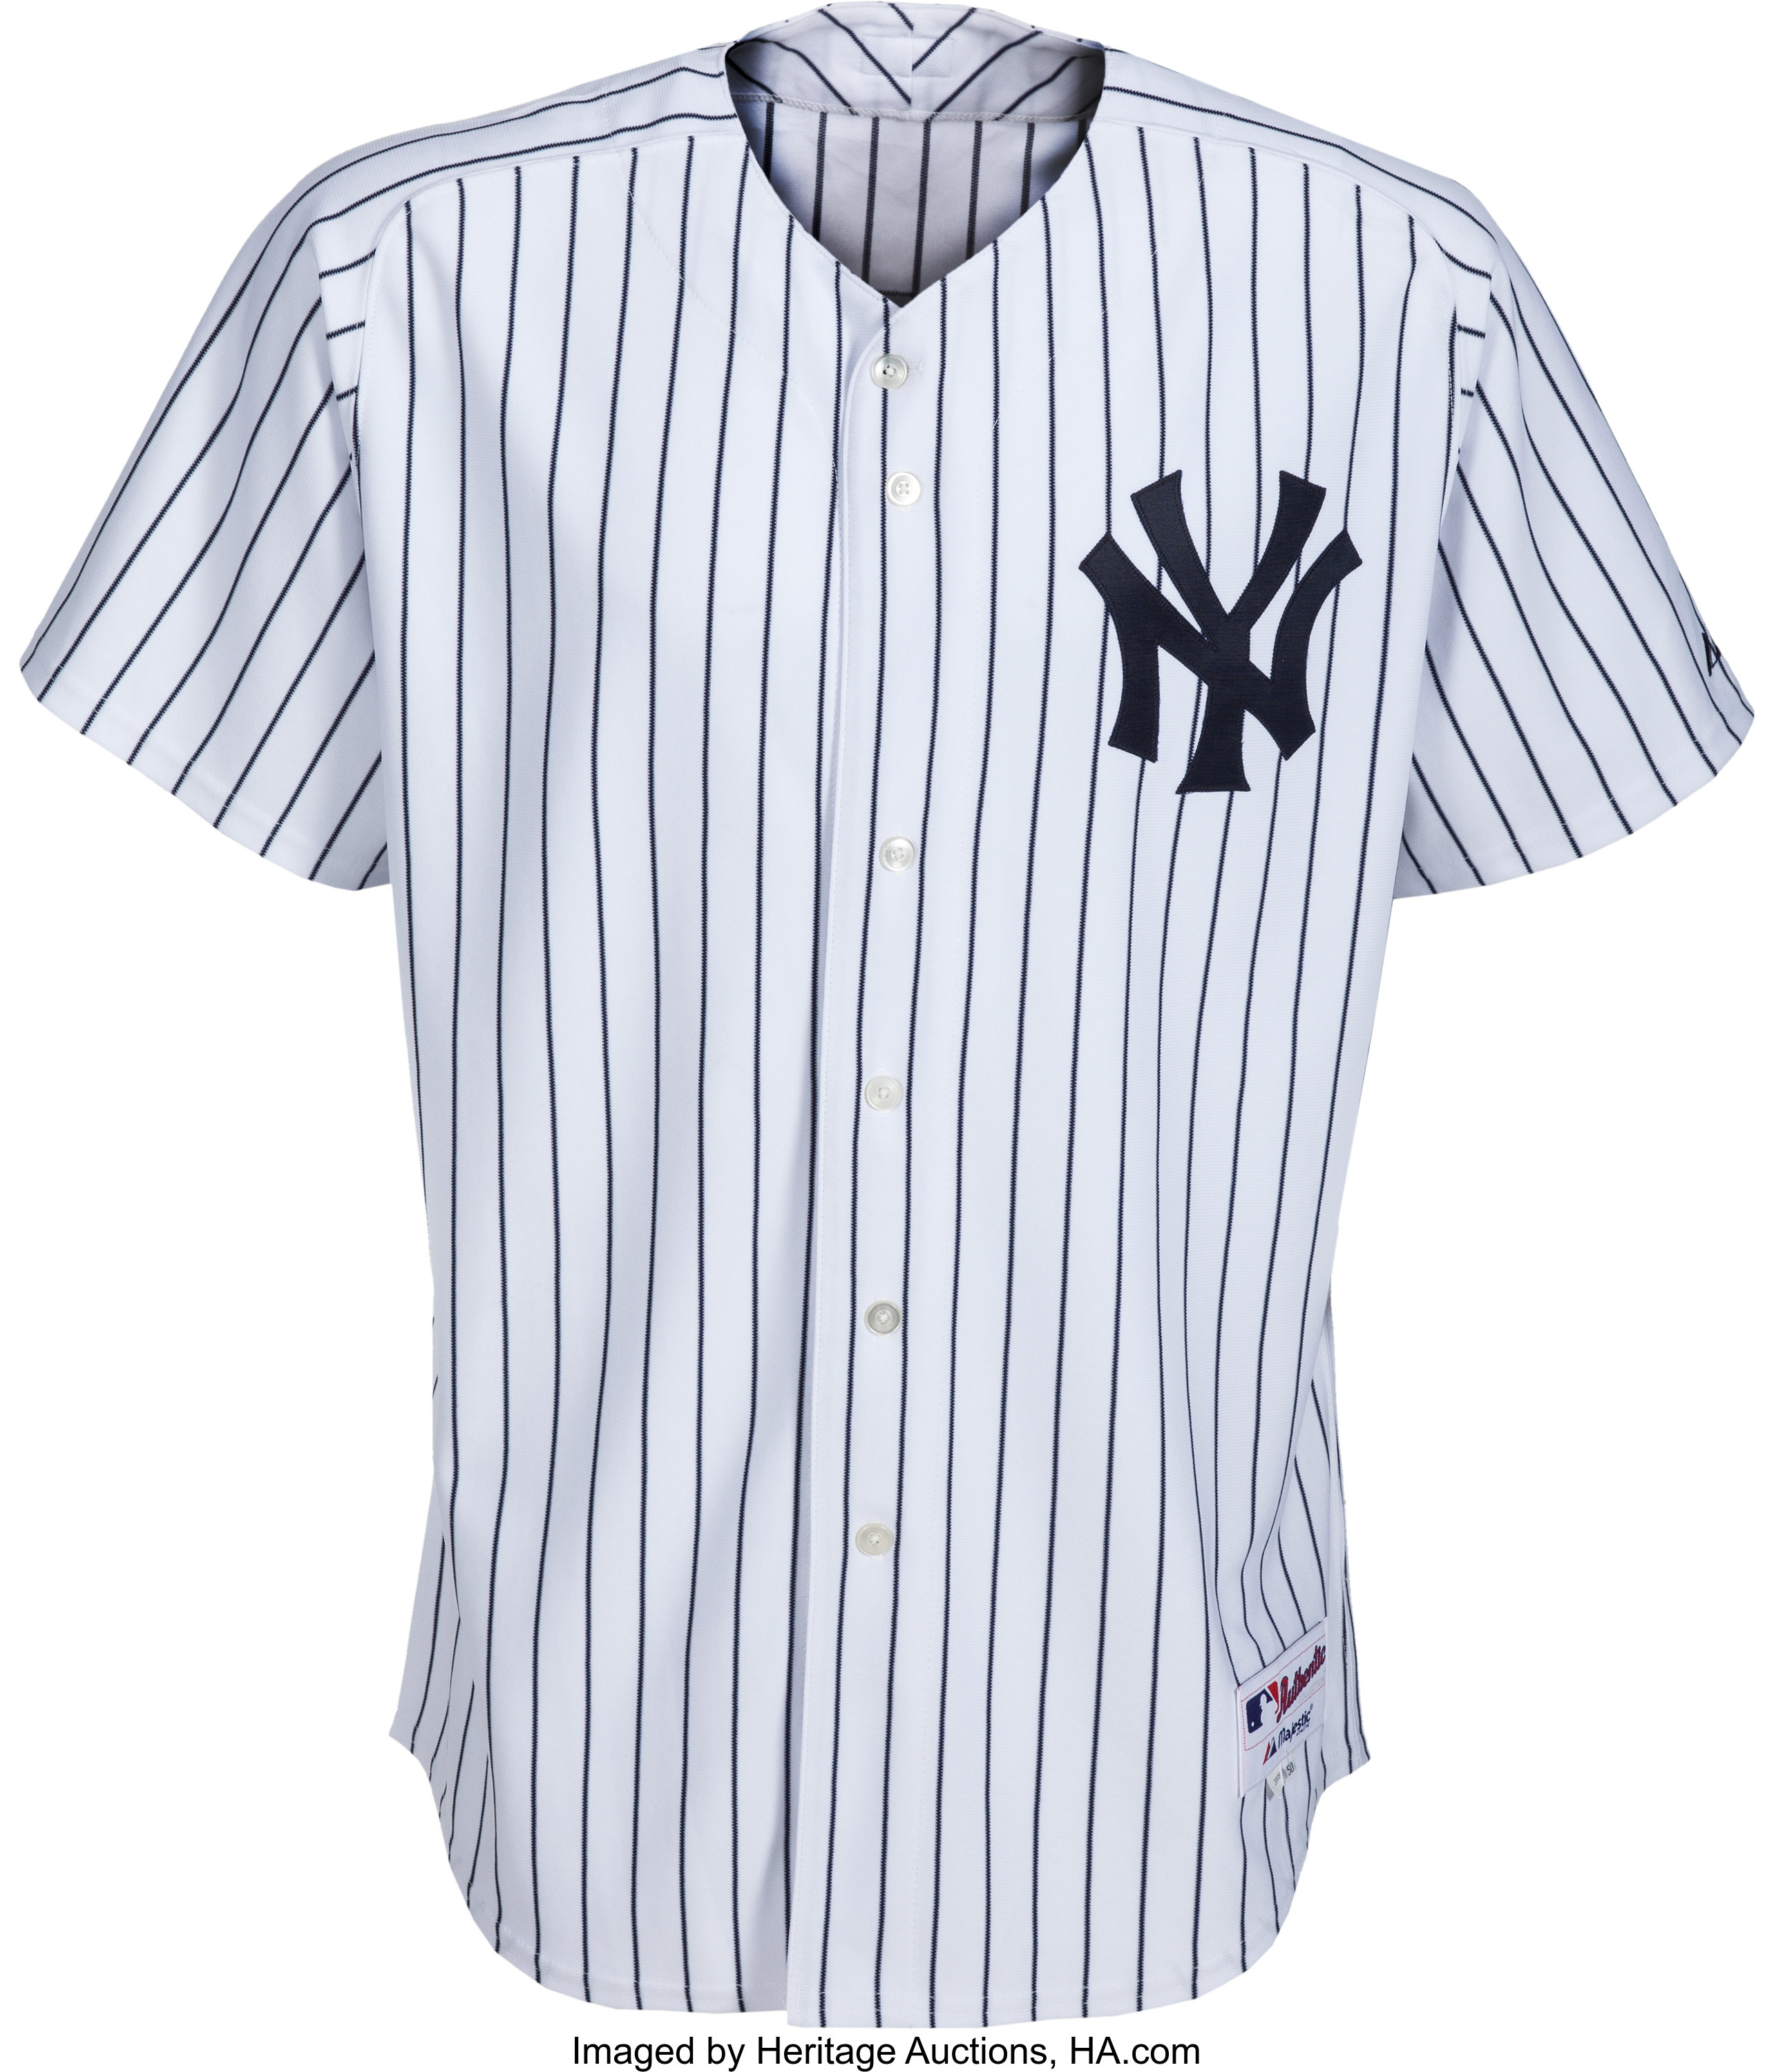 2008 Bobby Murcer New York Yankees Old-Timers' Day Jersey from The, Lot  #80371